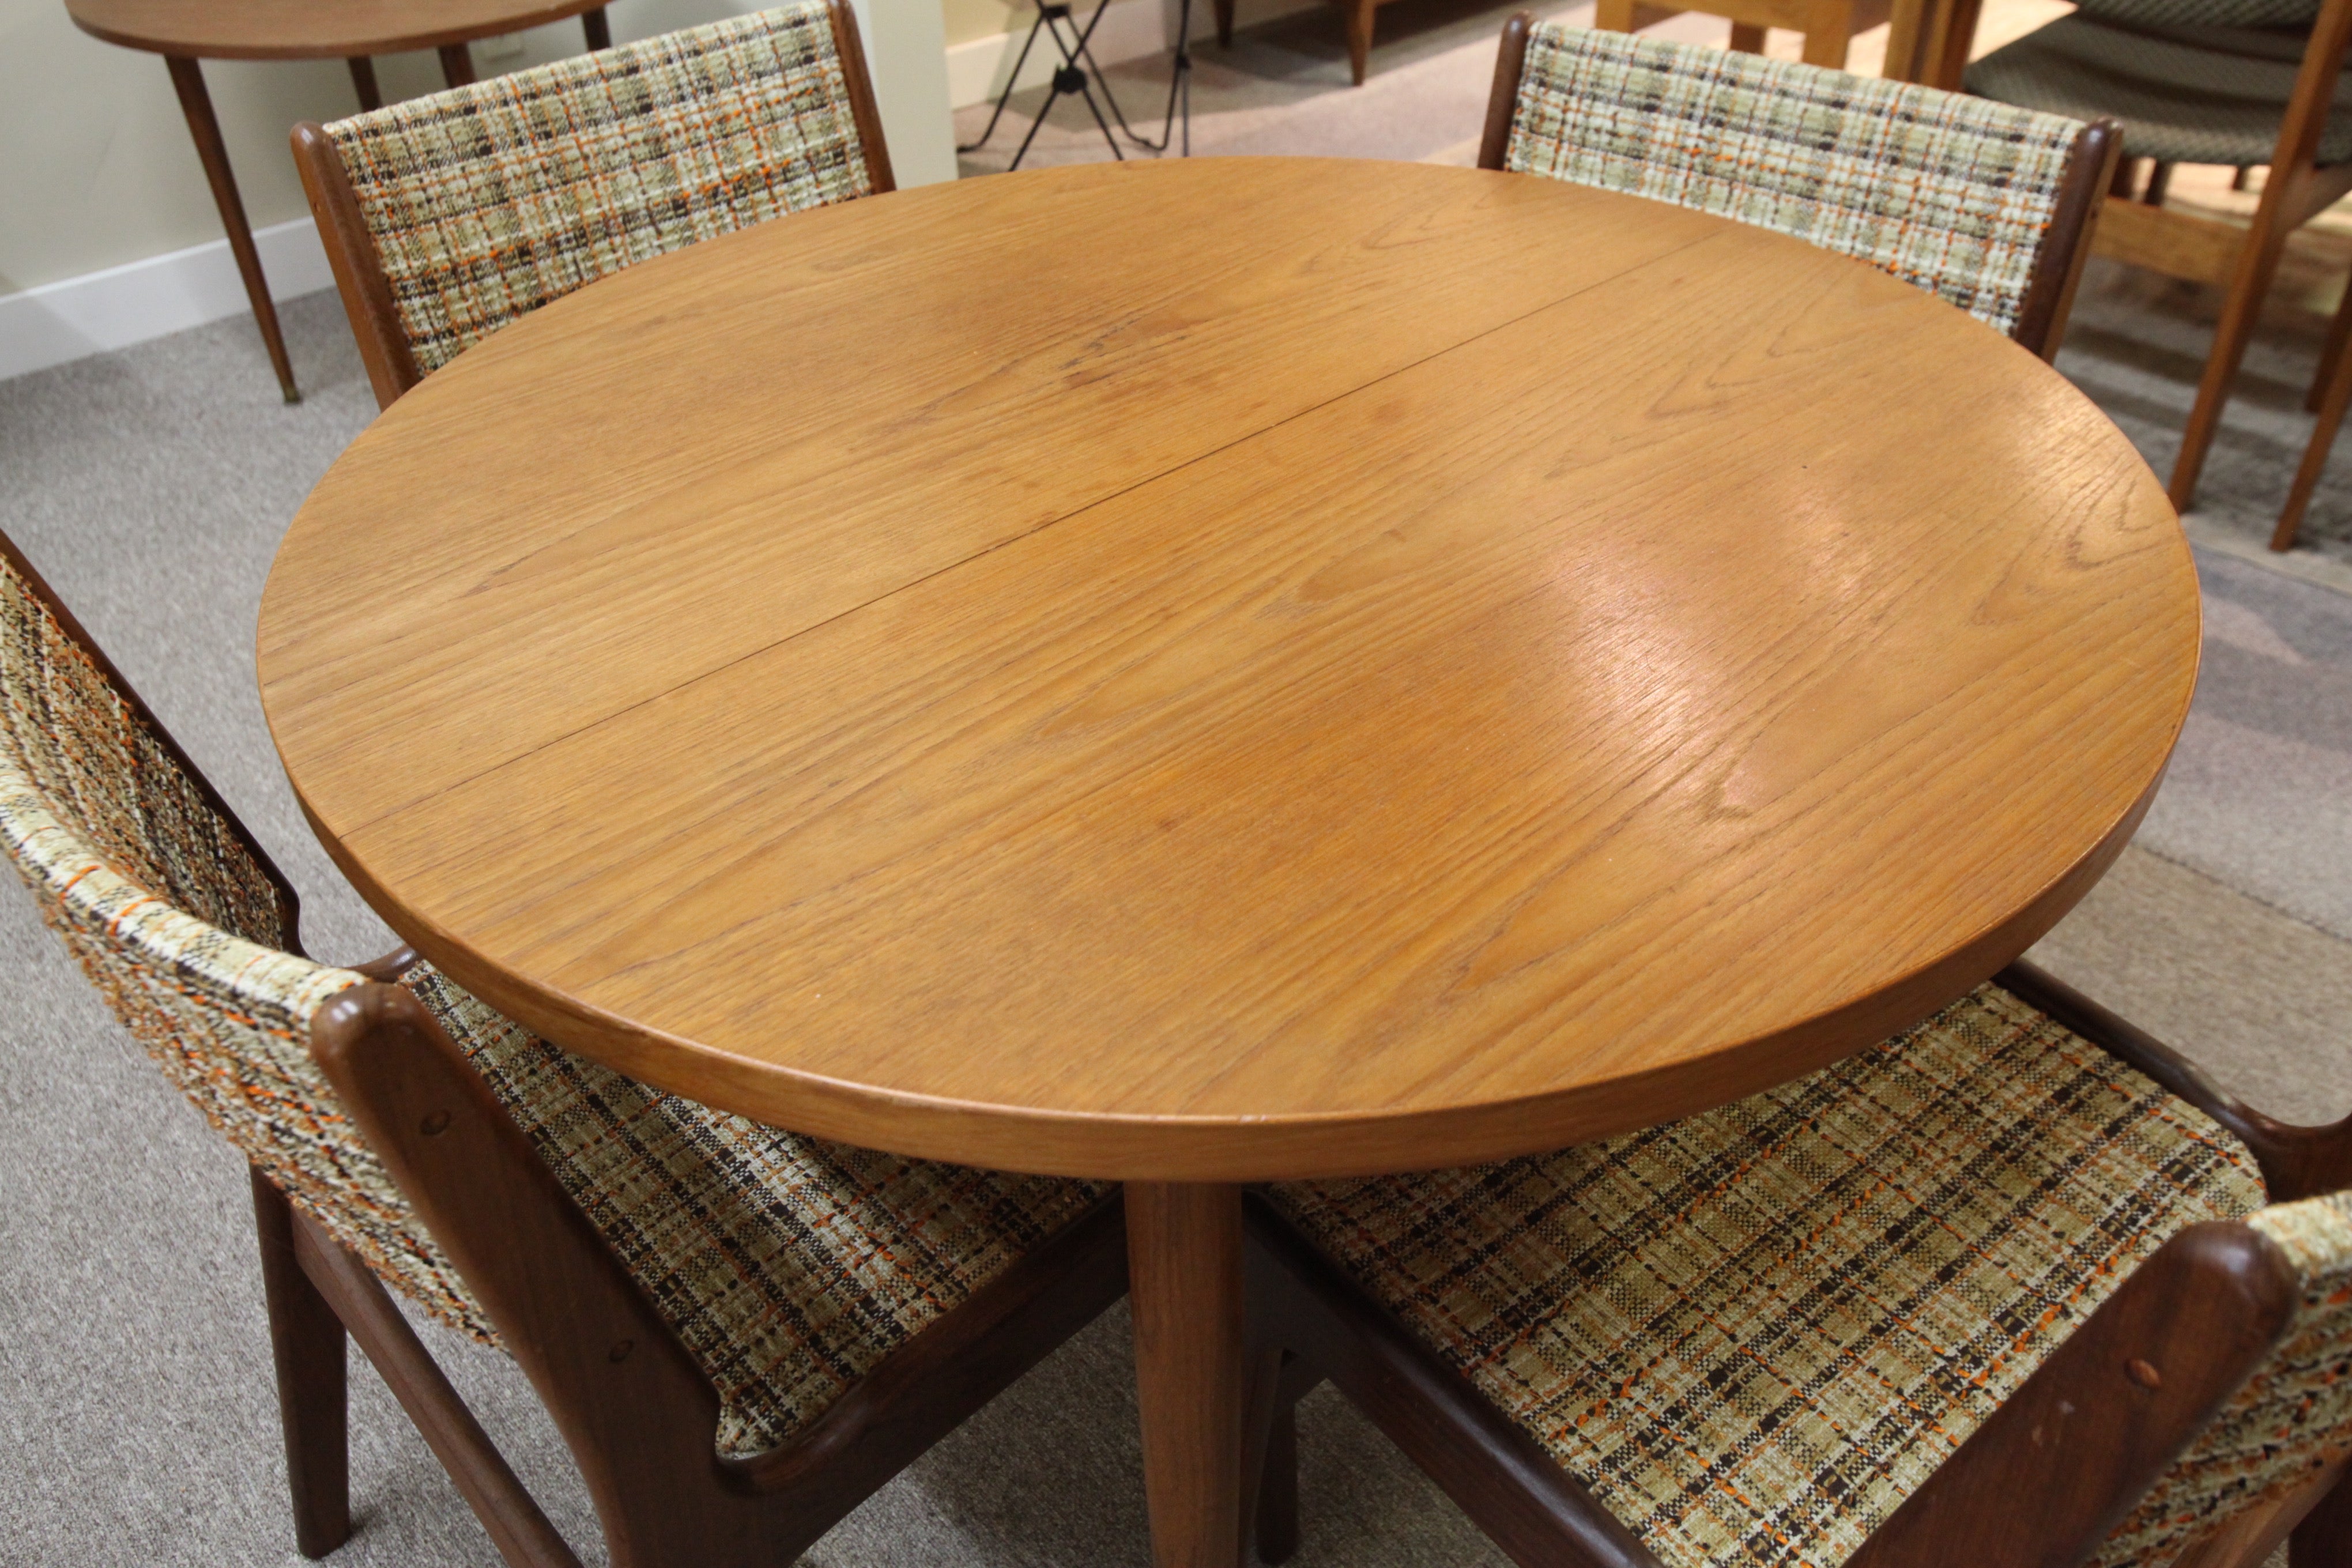 Teak Dining table (58" x 40") or (40" across round)